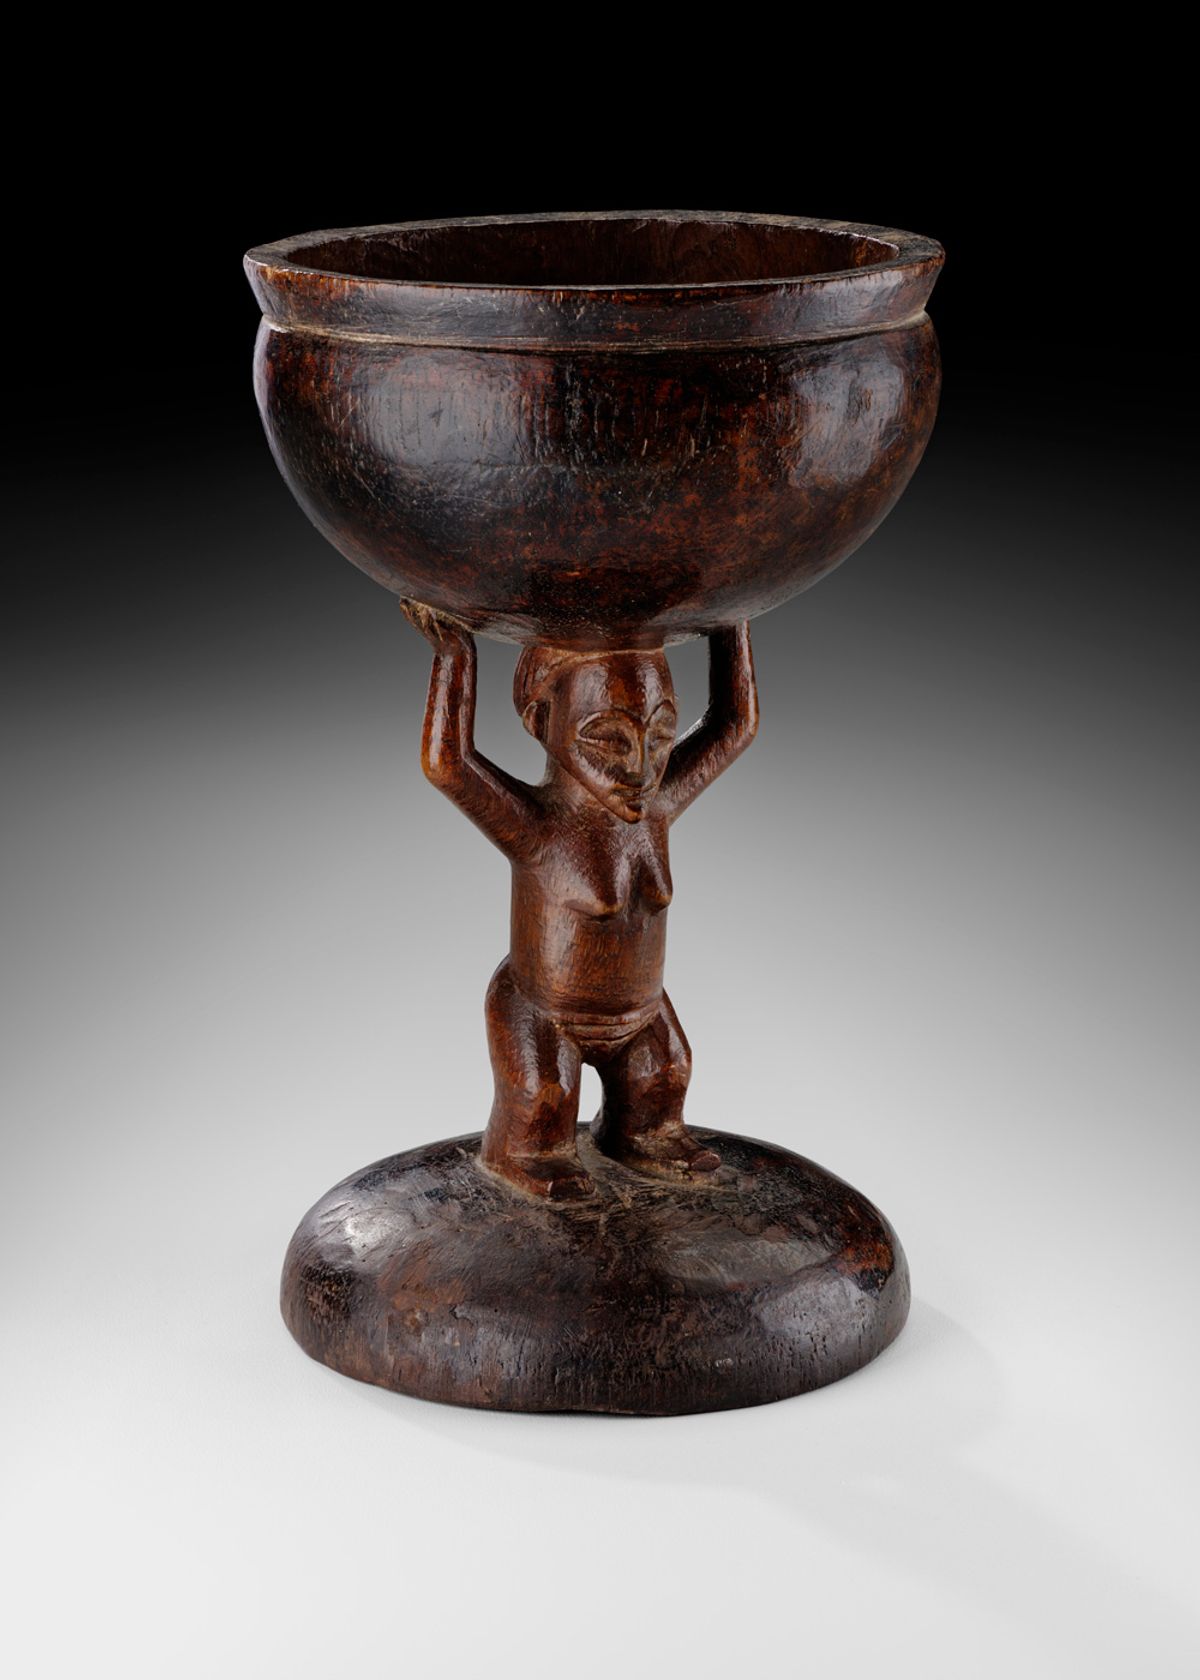 A decorative bowl mounted on a carving of a woman, one of the six works returned to the Angolan government courtesy of the Sindika Dokolo Foundation